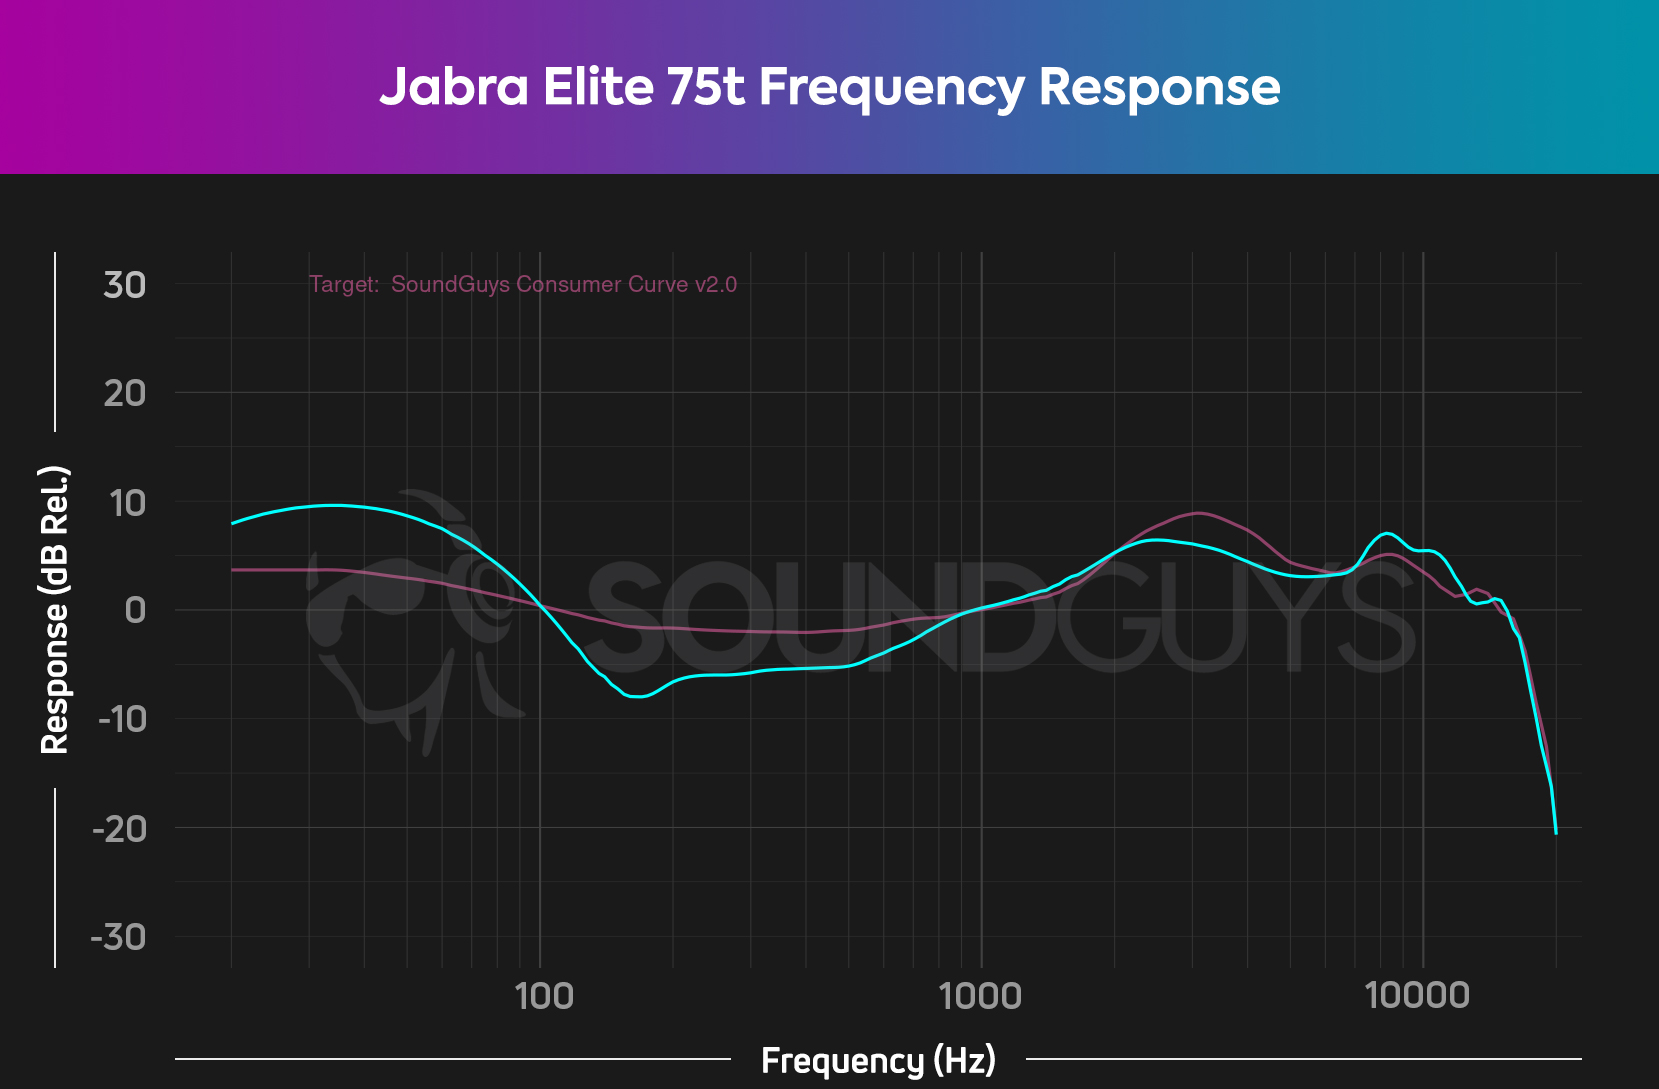 Chart shows the frequency response for the Jabra Elite 75t.